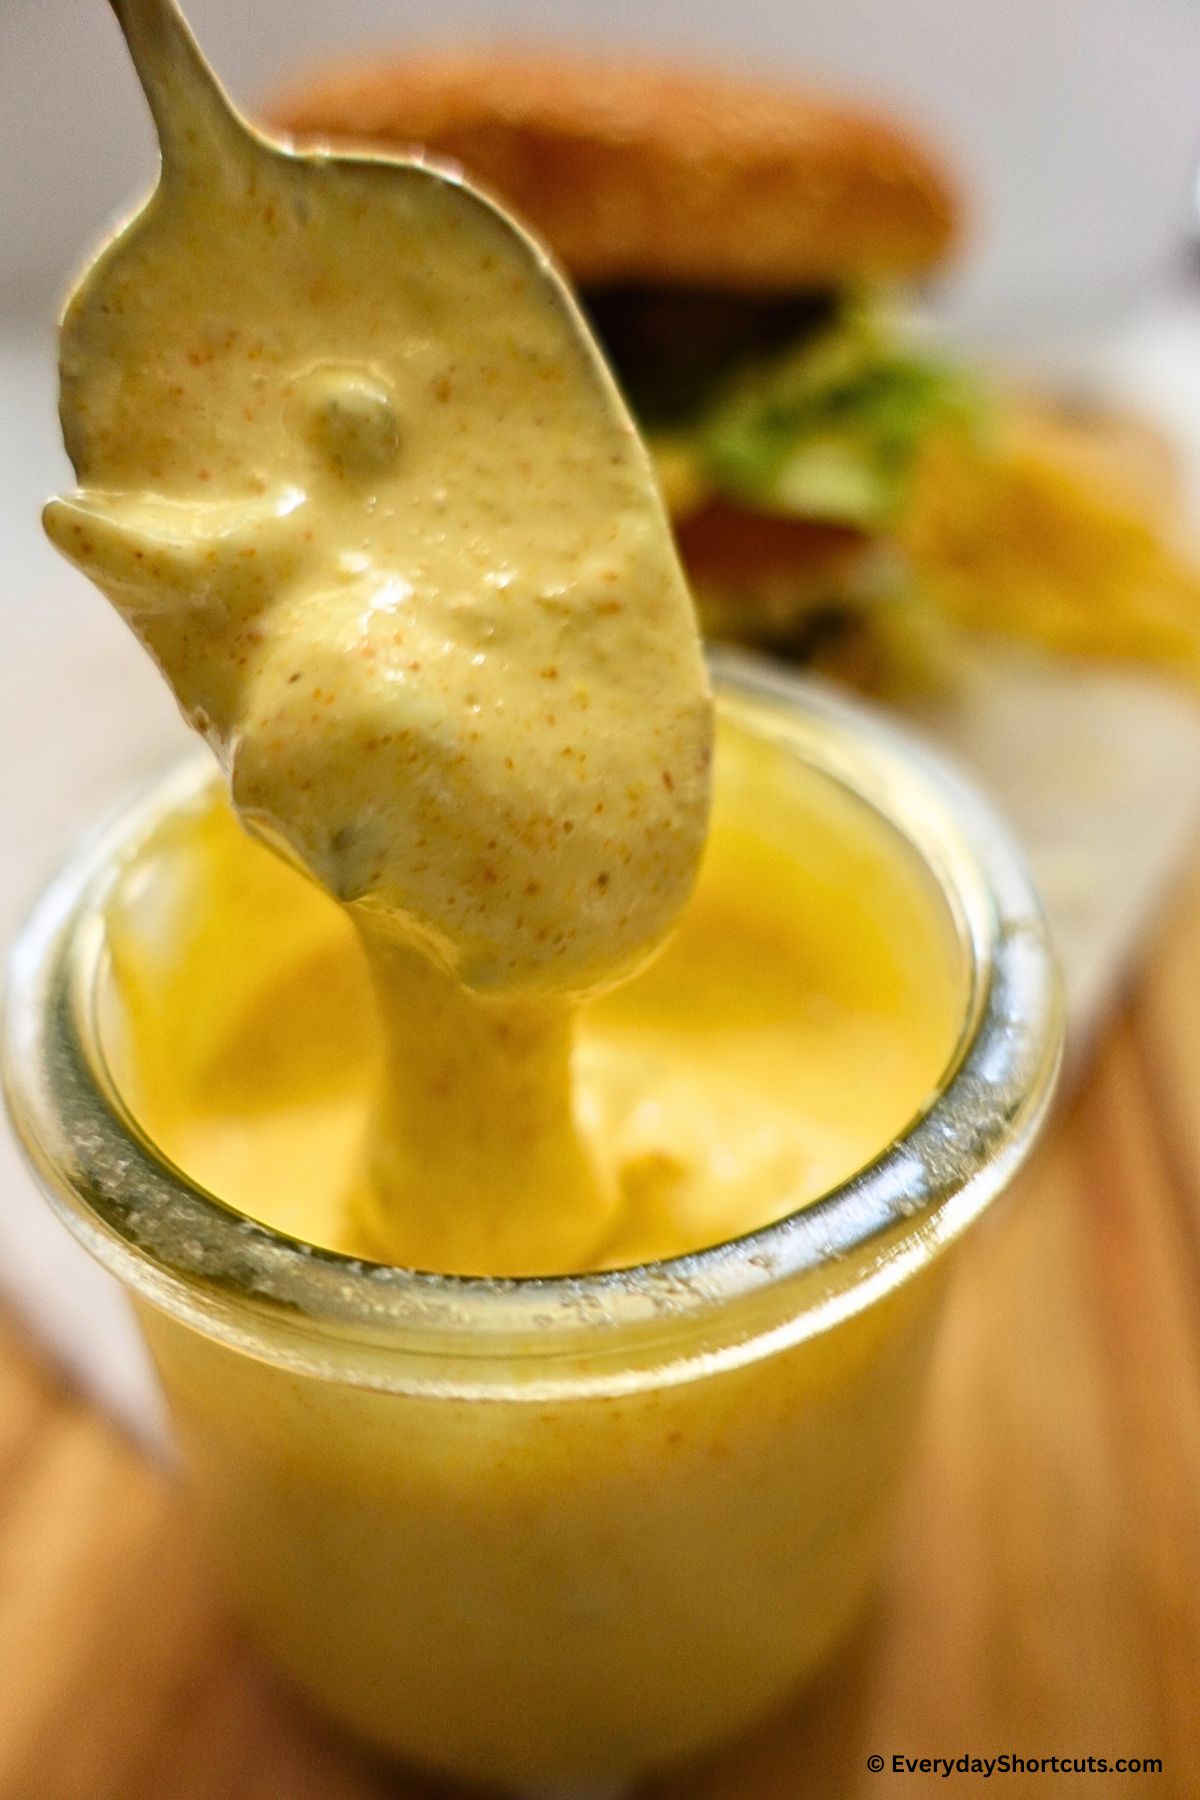 Big Mac Sauce Recipe without French Dressing